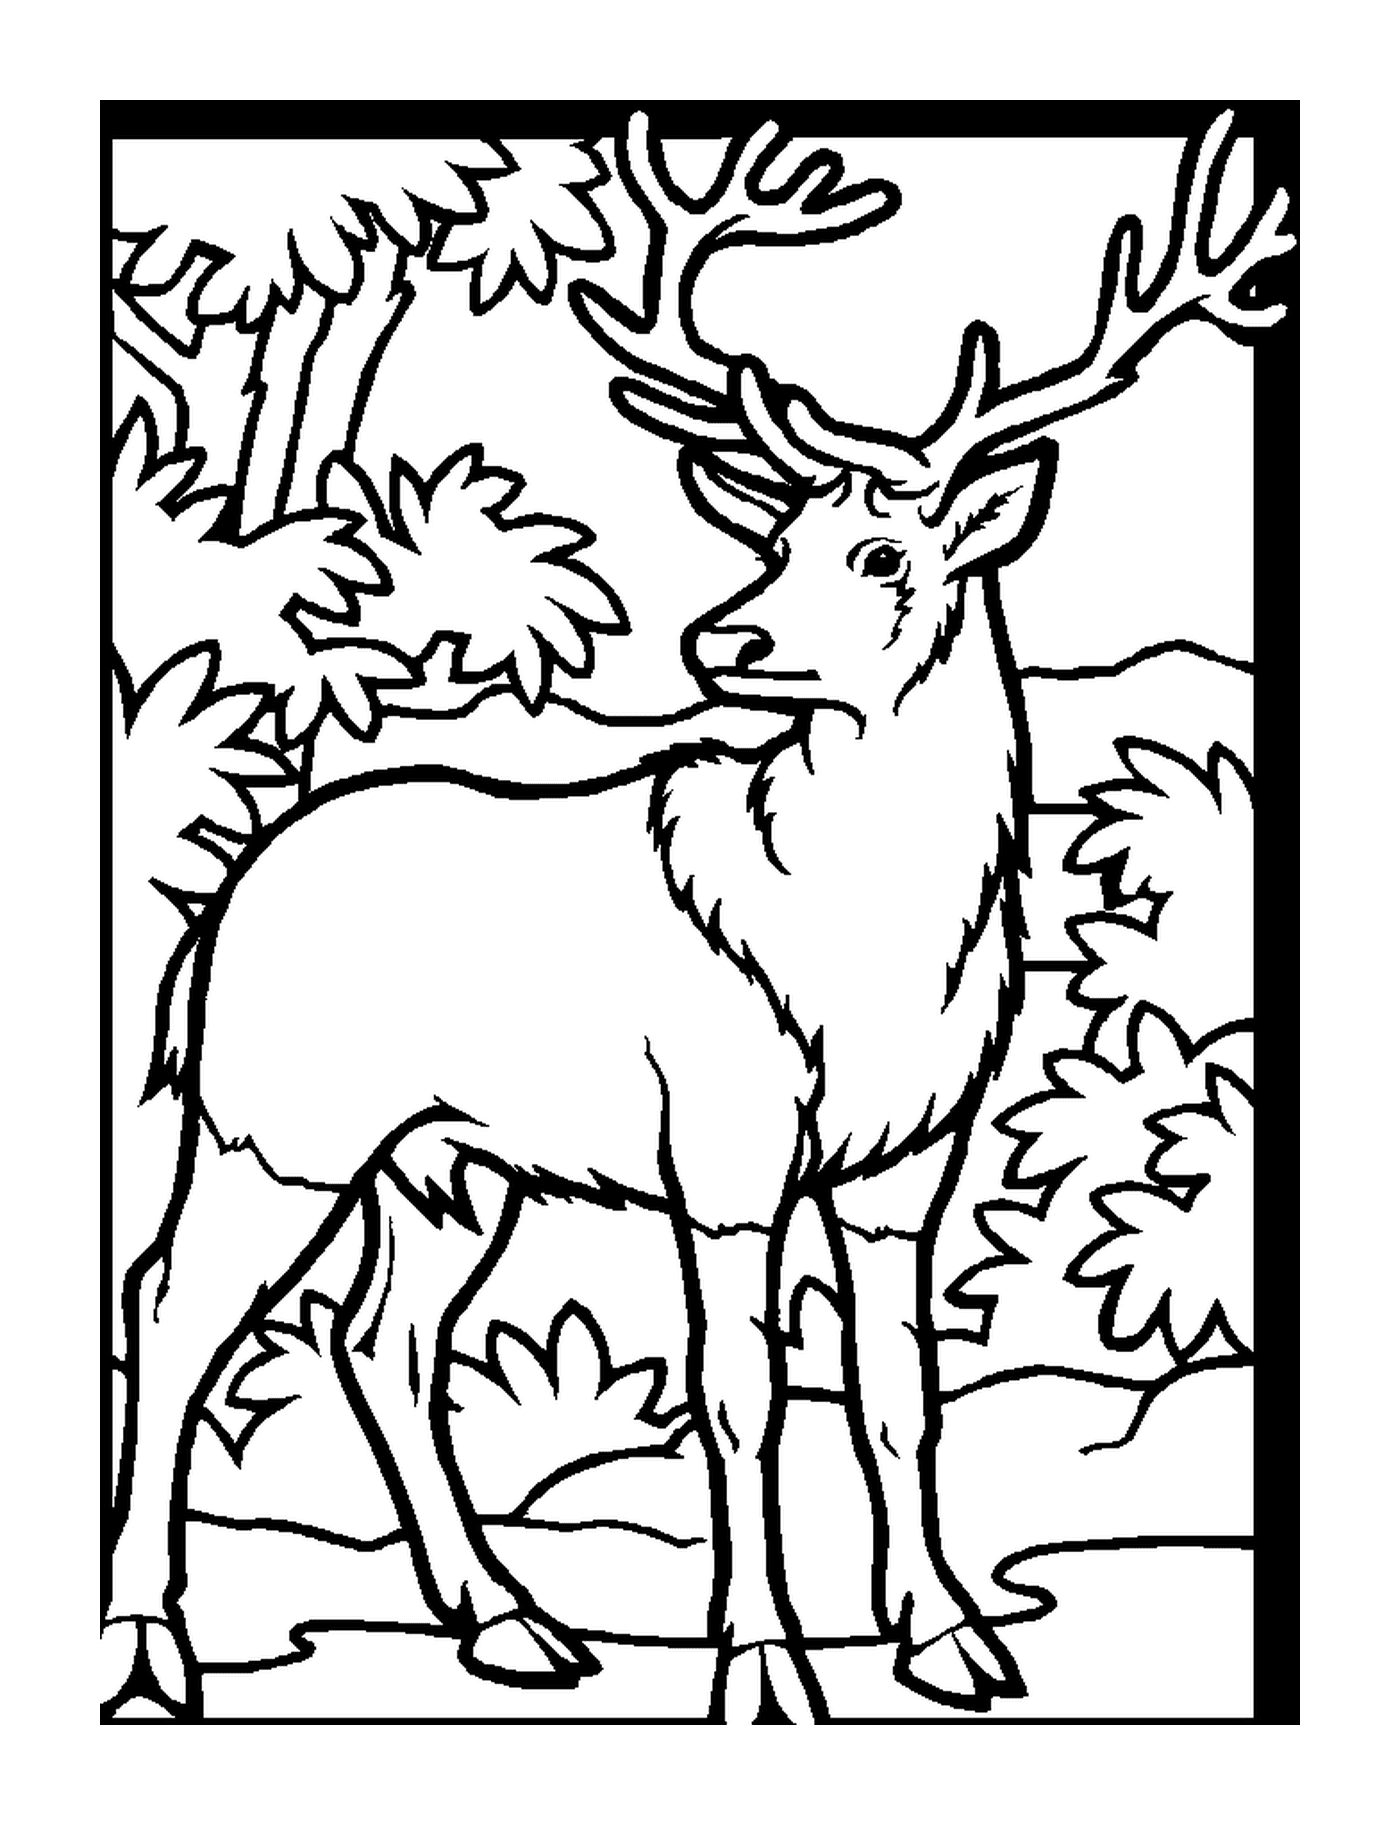  A deer standing in a forest 